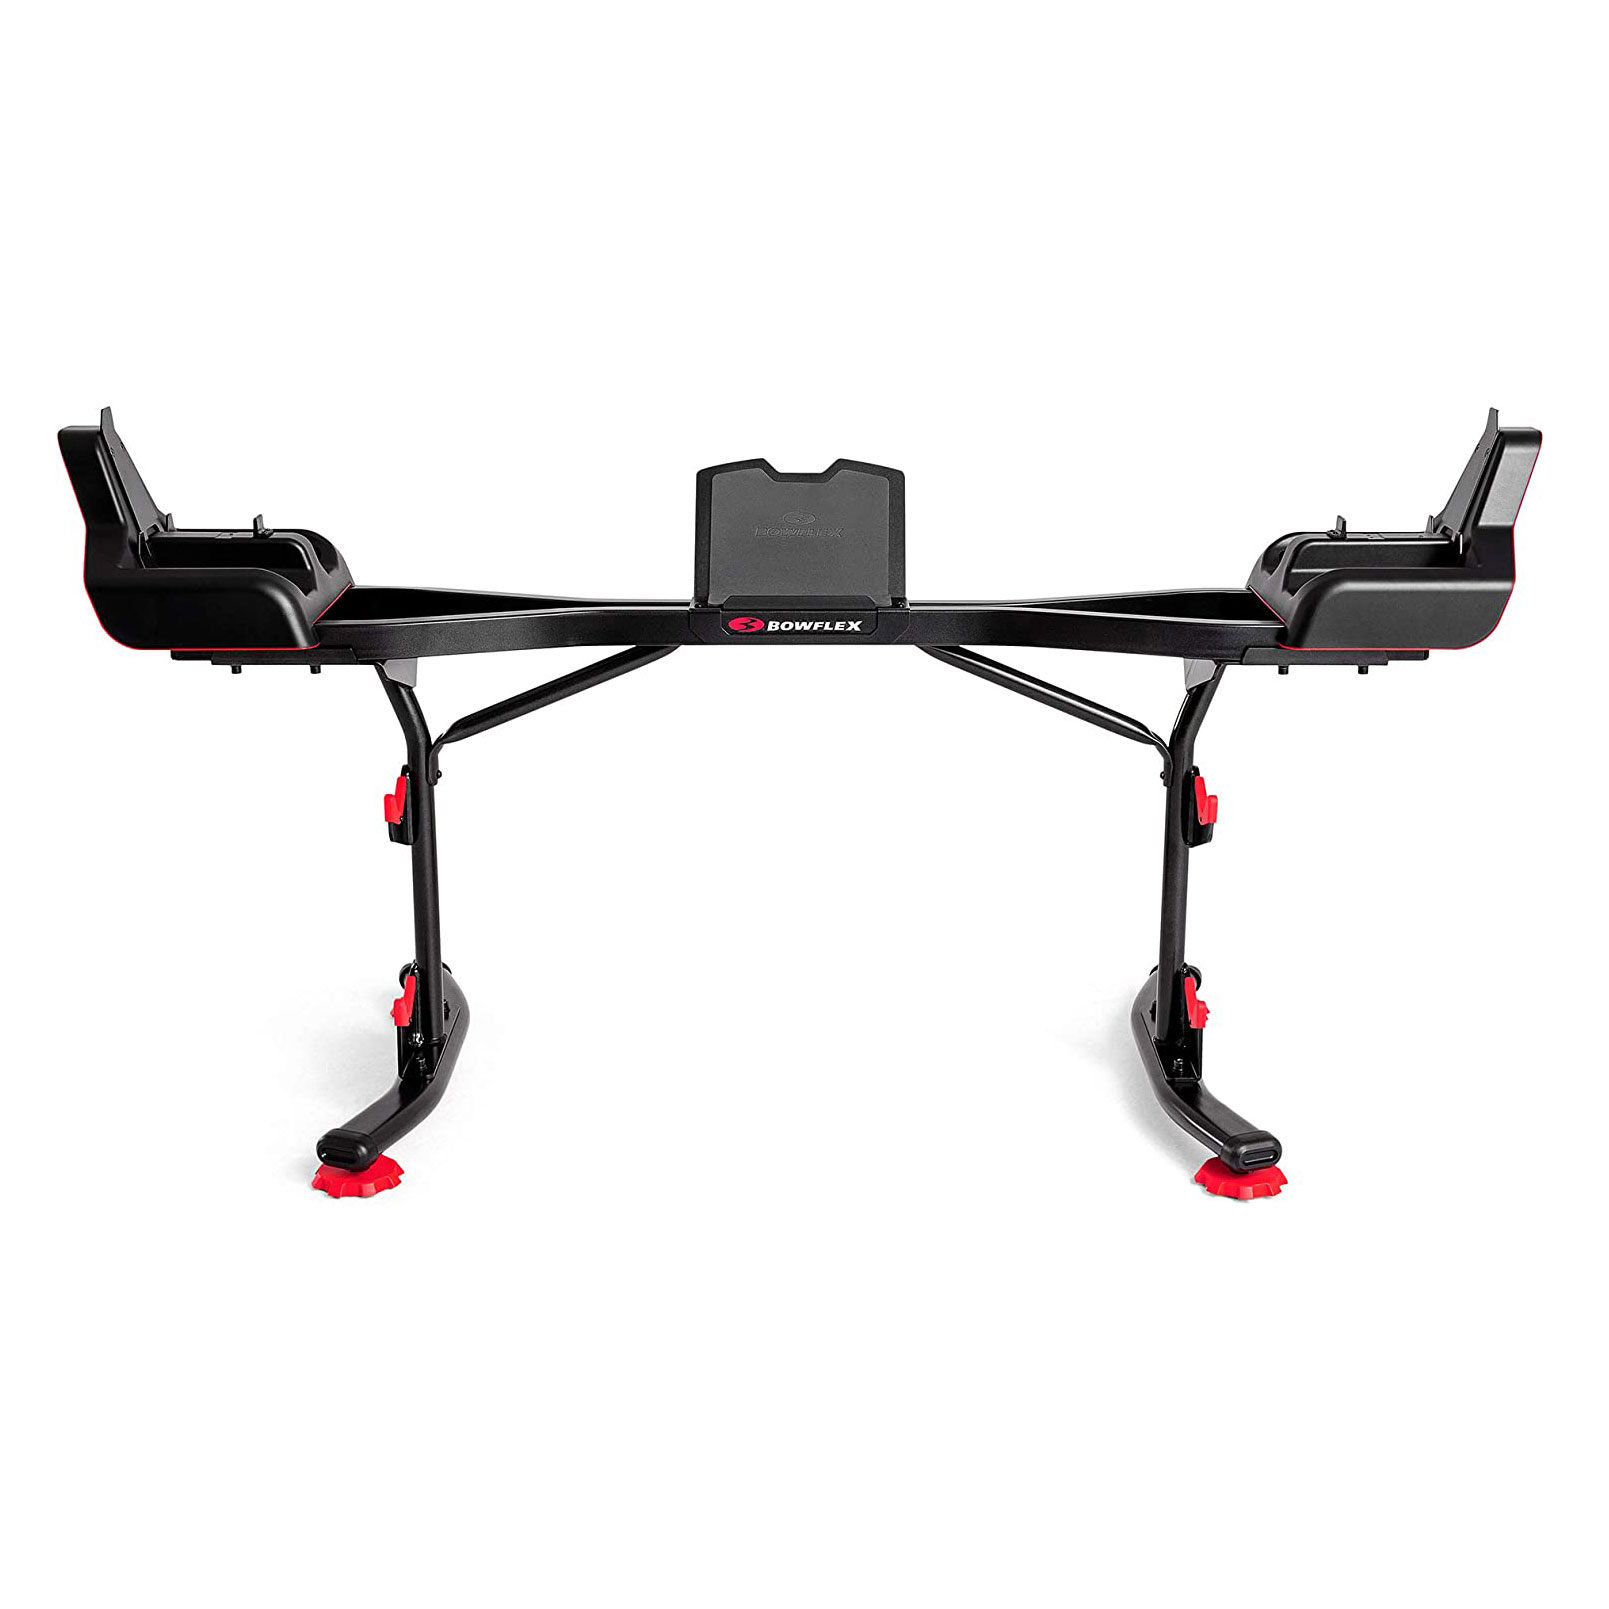 Bowflex SelectTech 2080 Stand with Media Rack for Barbell and Curl Bar - image 3 of 5